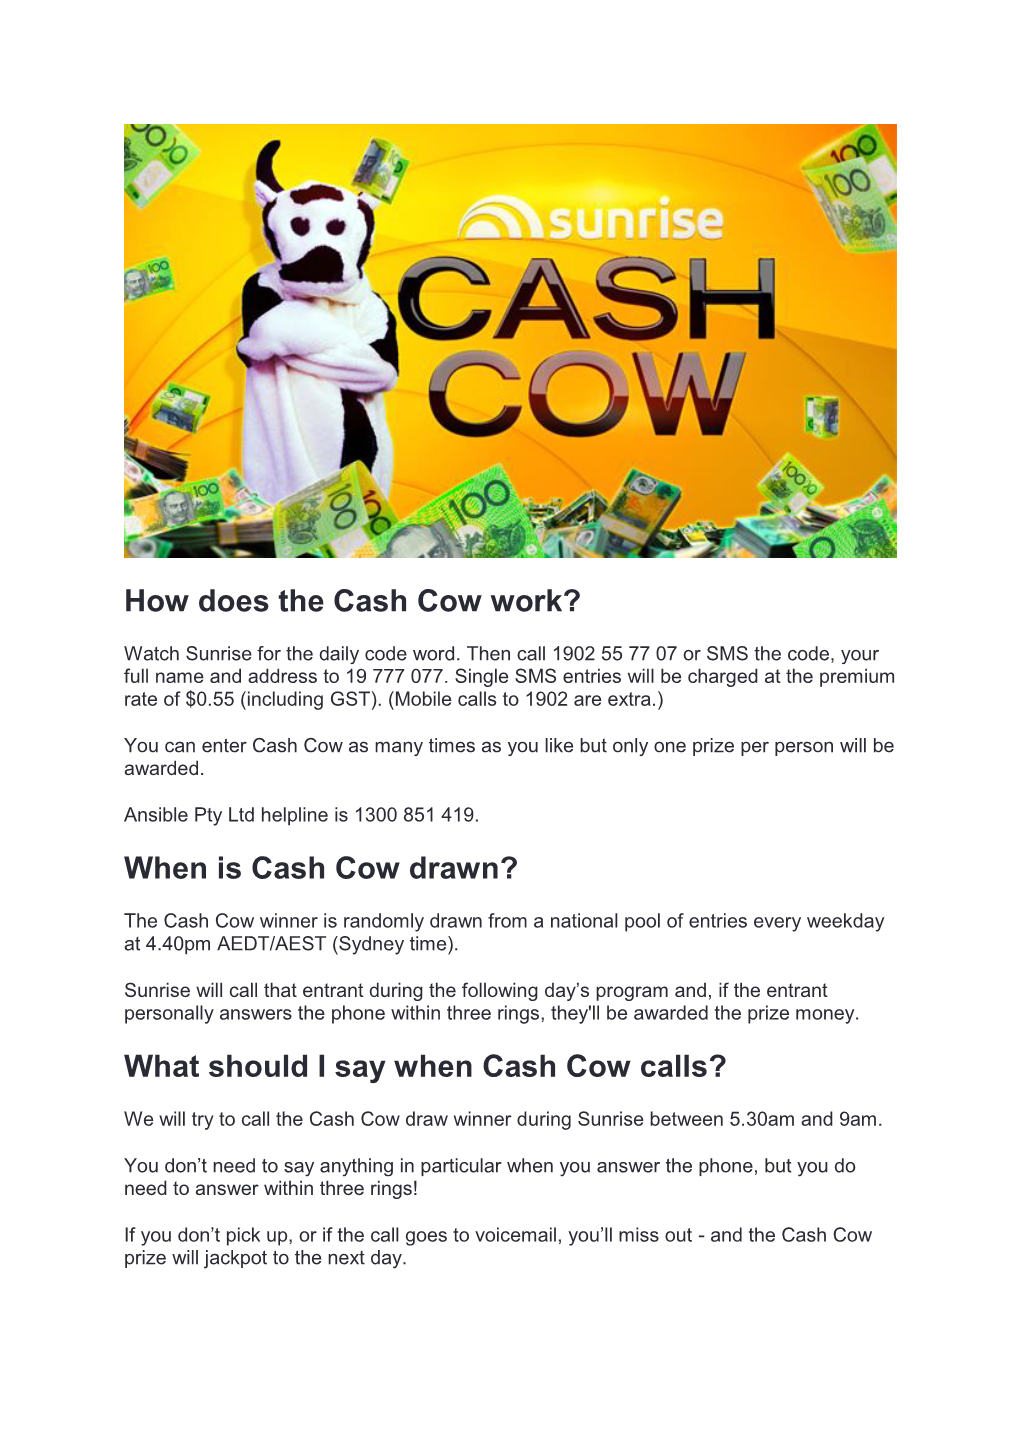 How Does the Cash Cow Work? When Is Cash Cow Drawn? What Should I